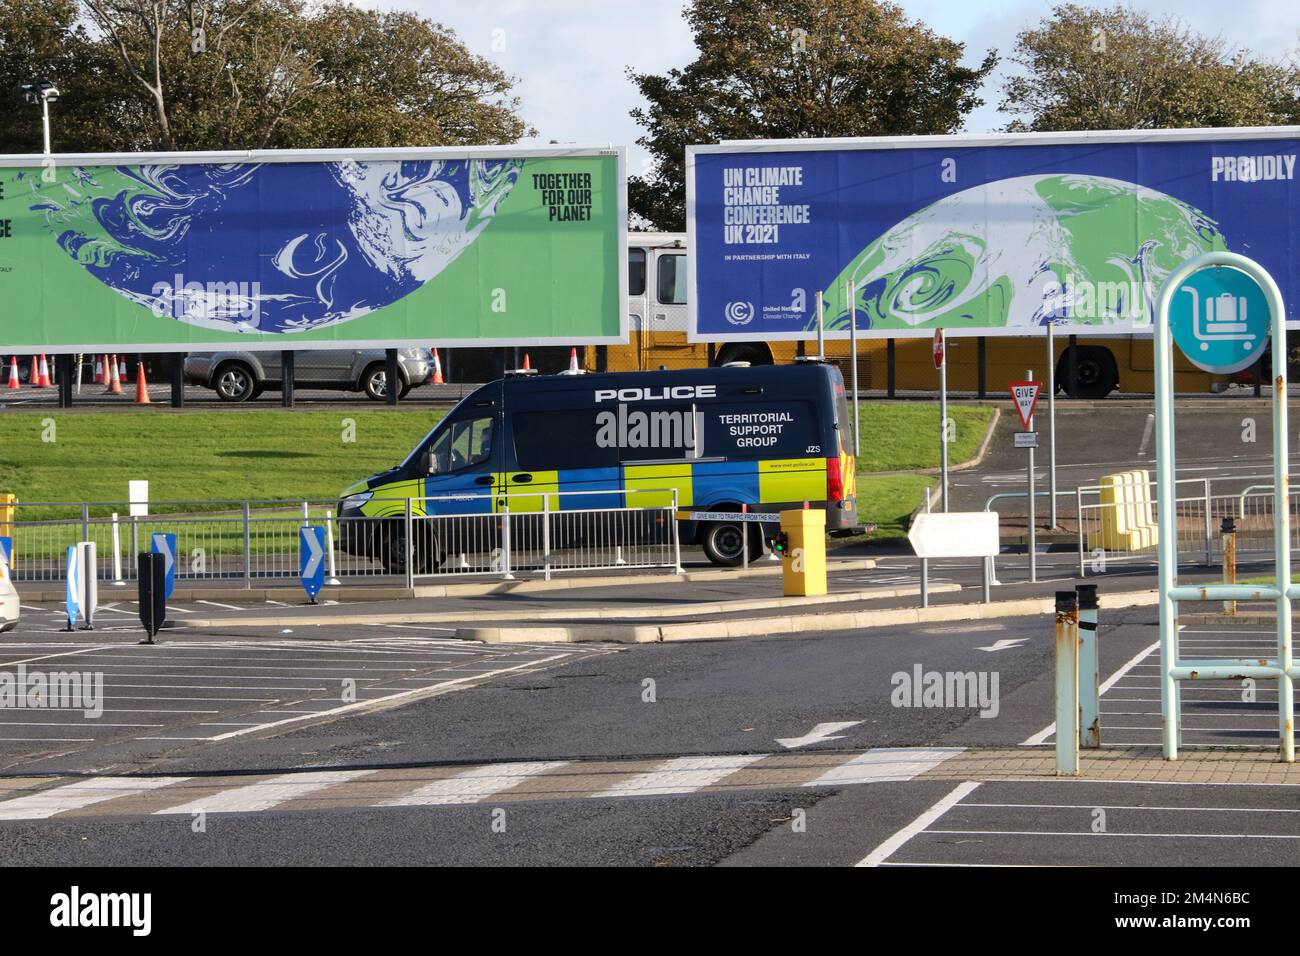 Glasgow Prestwick Airport, Prestwick, Ayrshire, Scotland, UK. Image shows large advertising hoarding promoting the UK Climate Change conference being held in Glasgow 2021. Known as COP 26. A Police van passes in front of he hoarding Stock Photo